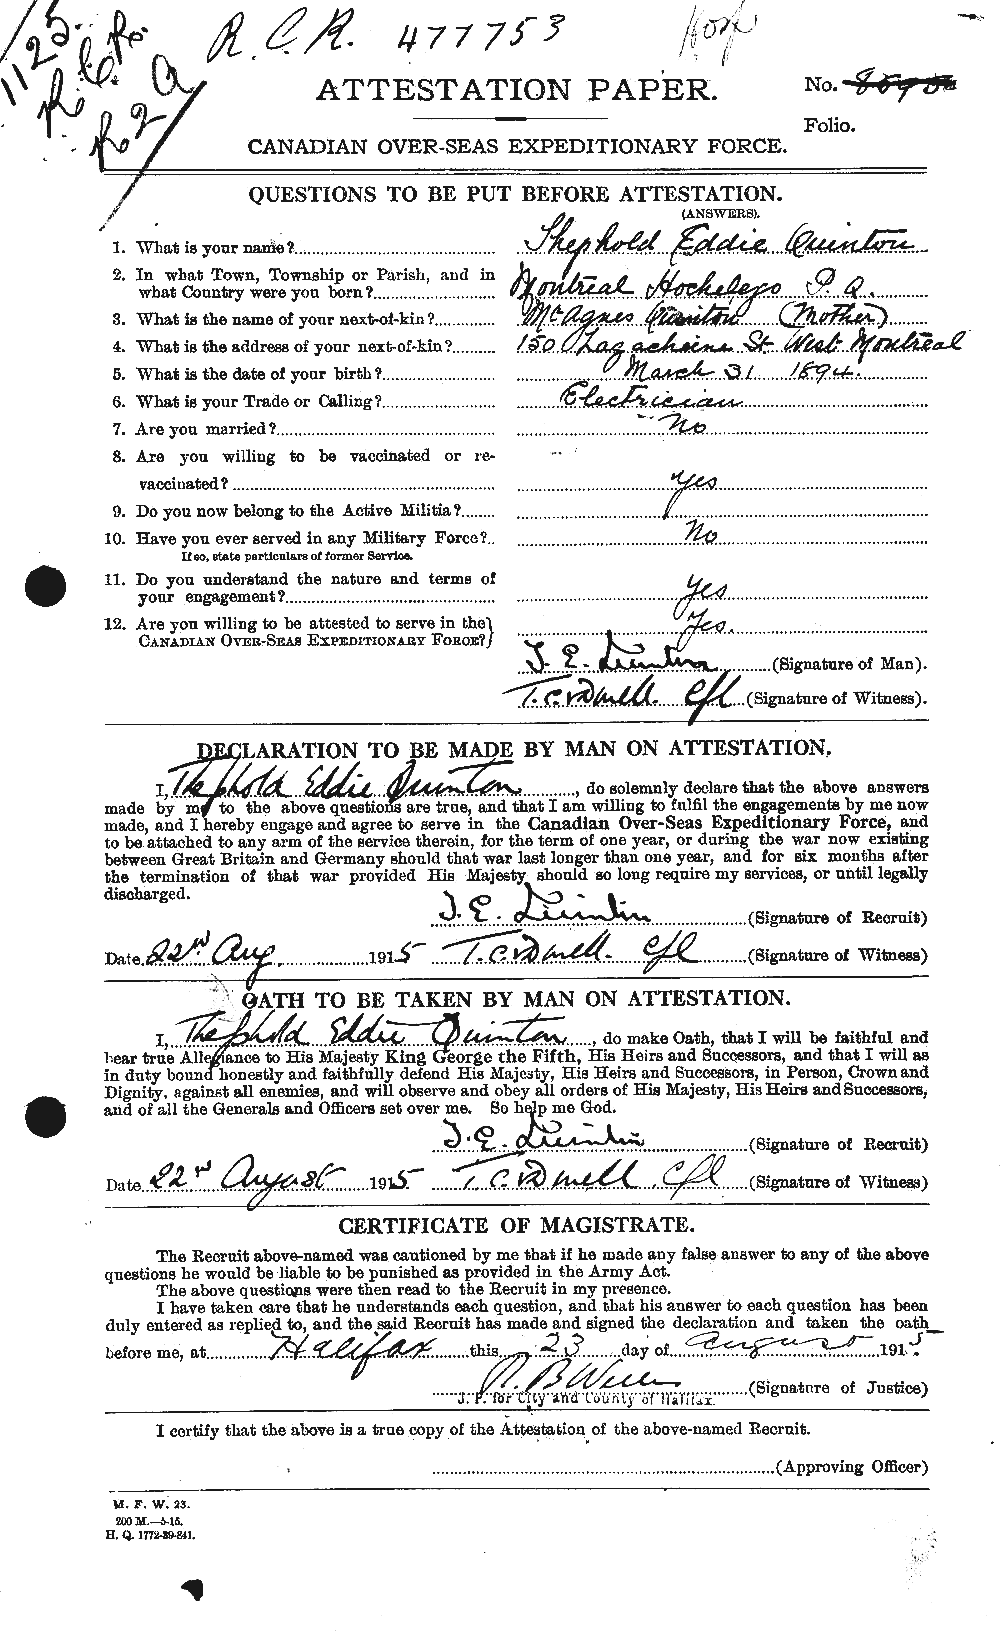 Personnel Records of the First World War - CEF 590596a